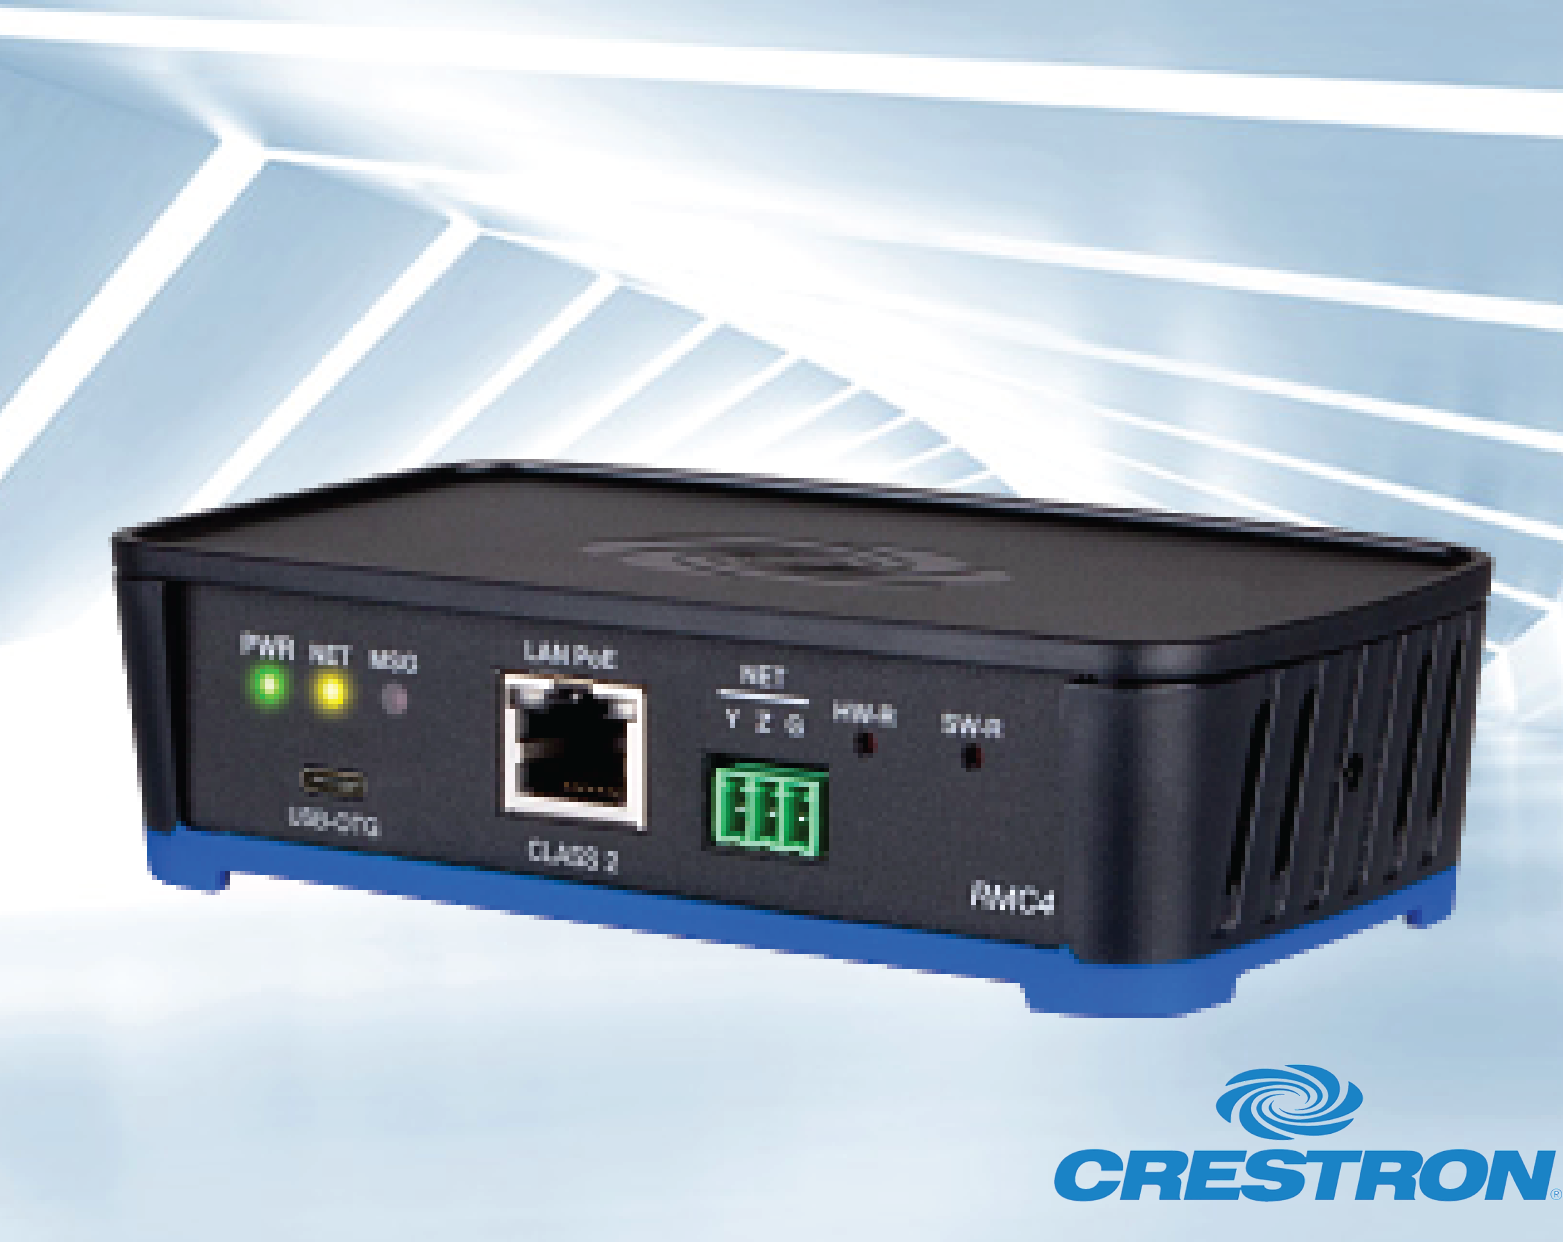 Crestron Control Systems